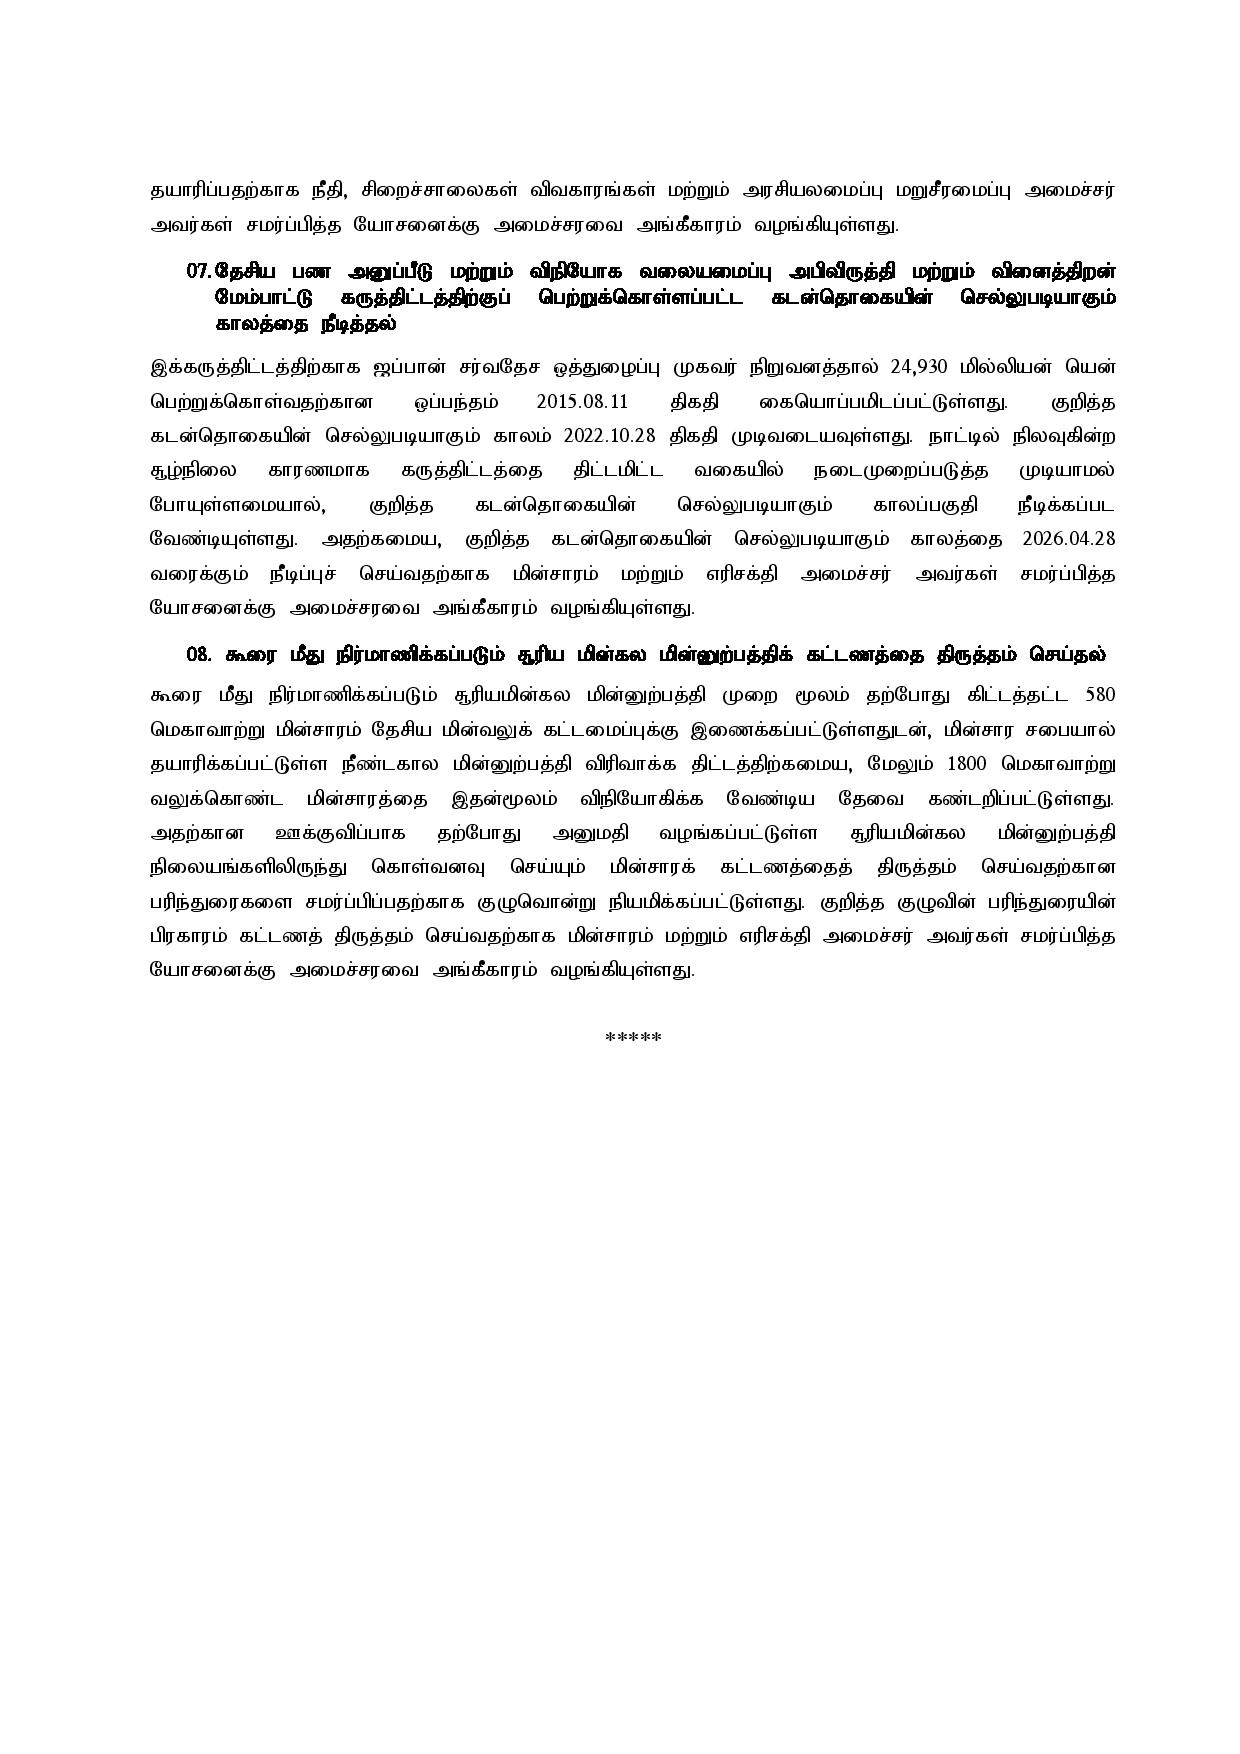 Cabinet Decisions on 25.10.2022 Tamil page 003 1